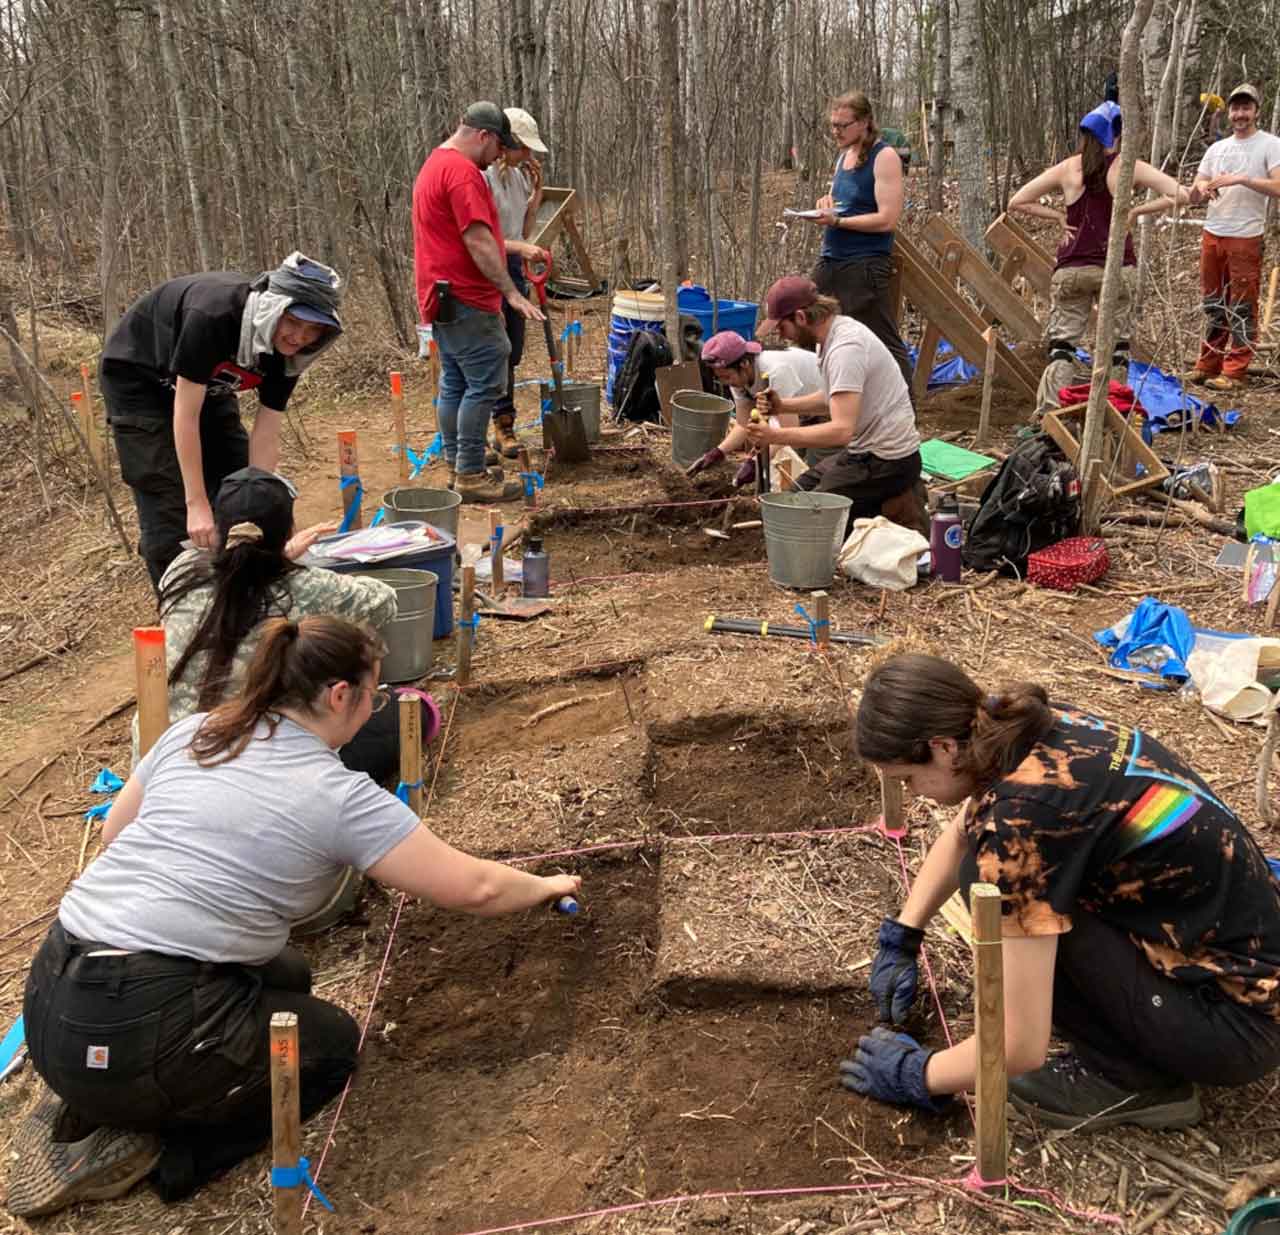 Professors and students from Lakehead University’s Anthropology department are working with Indigenous and Métis community members to excavate archaeological sites located beside the McIntyre River on the University’s Thunder Bay campus